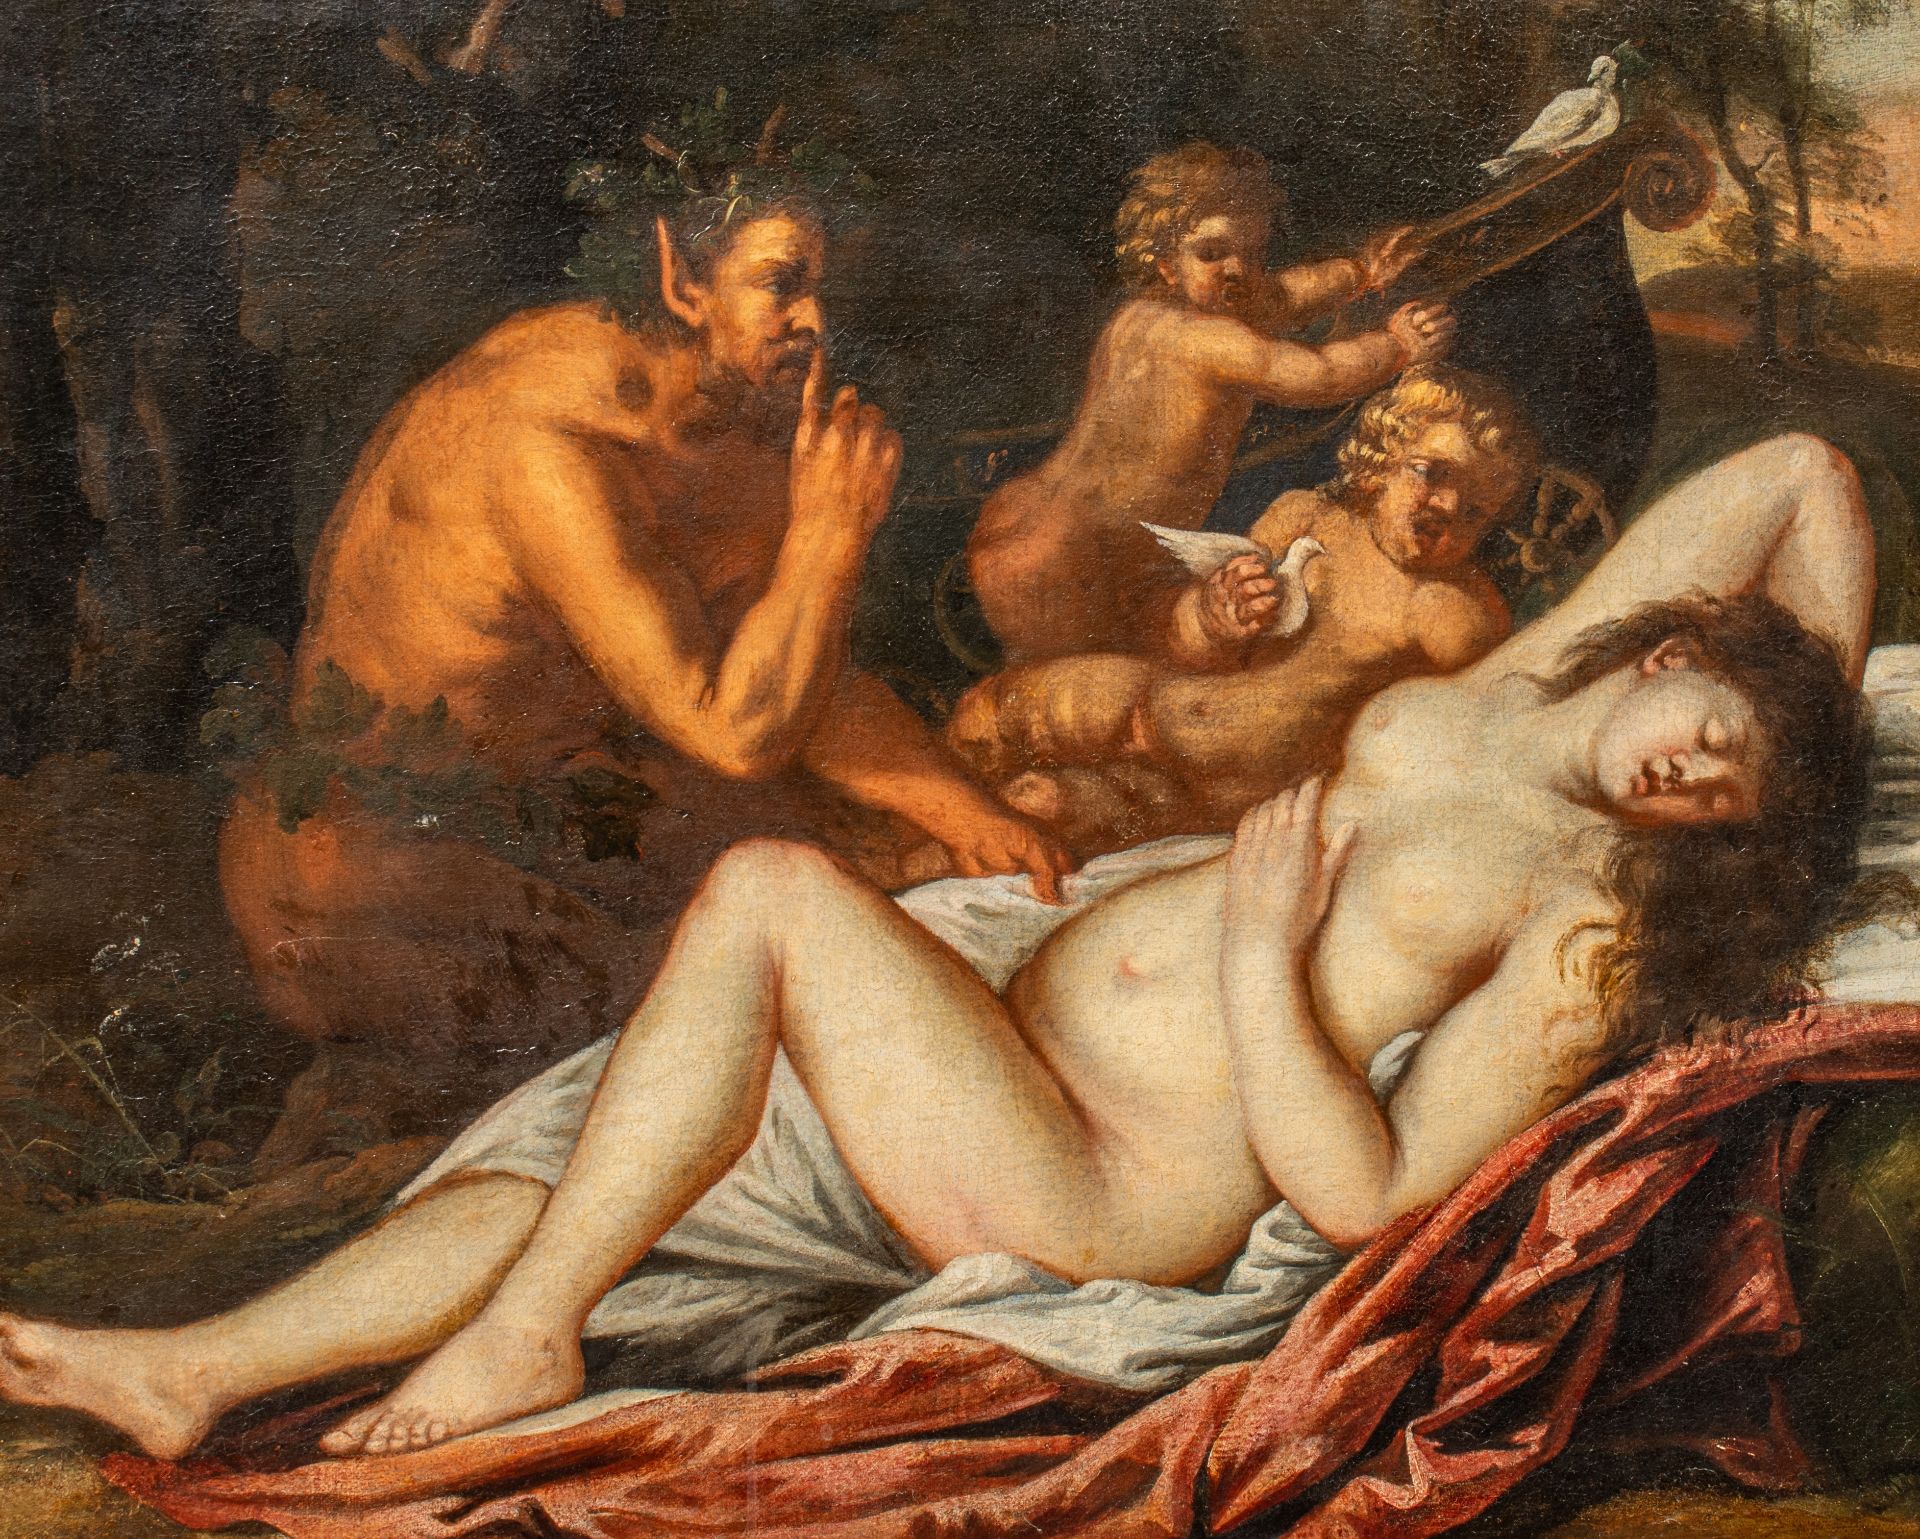 Jupiter and Antiope, 17thC Venetian School, oil on canvas 57 x 71 cm. (22.4 x 27.9 in.), Frame: 76 x